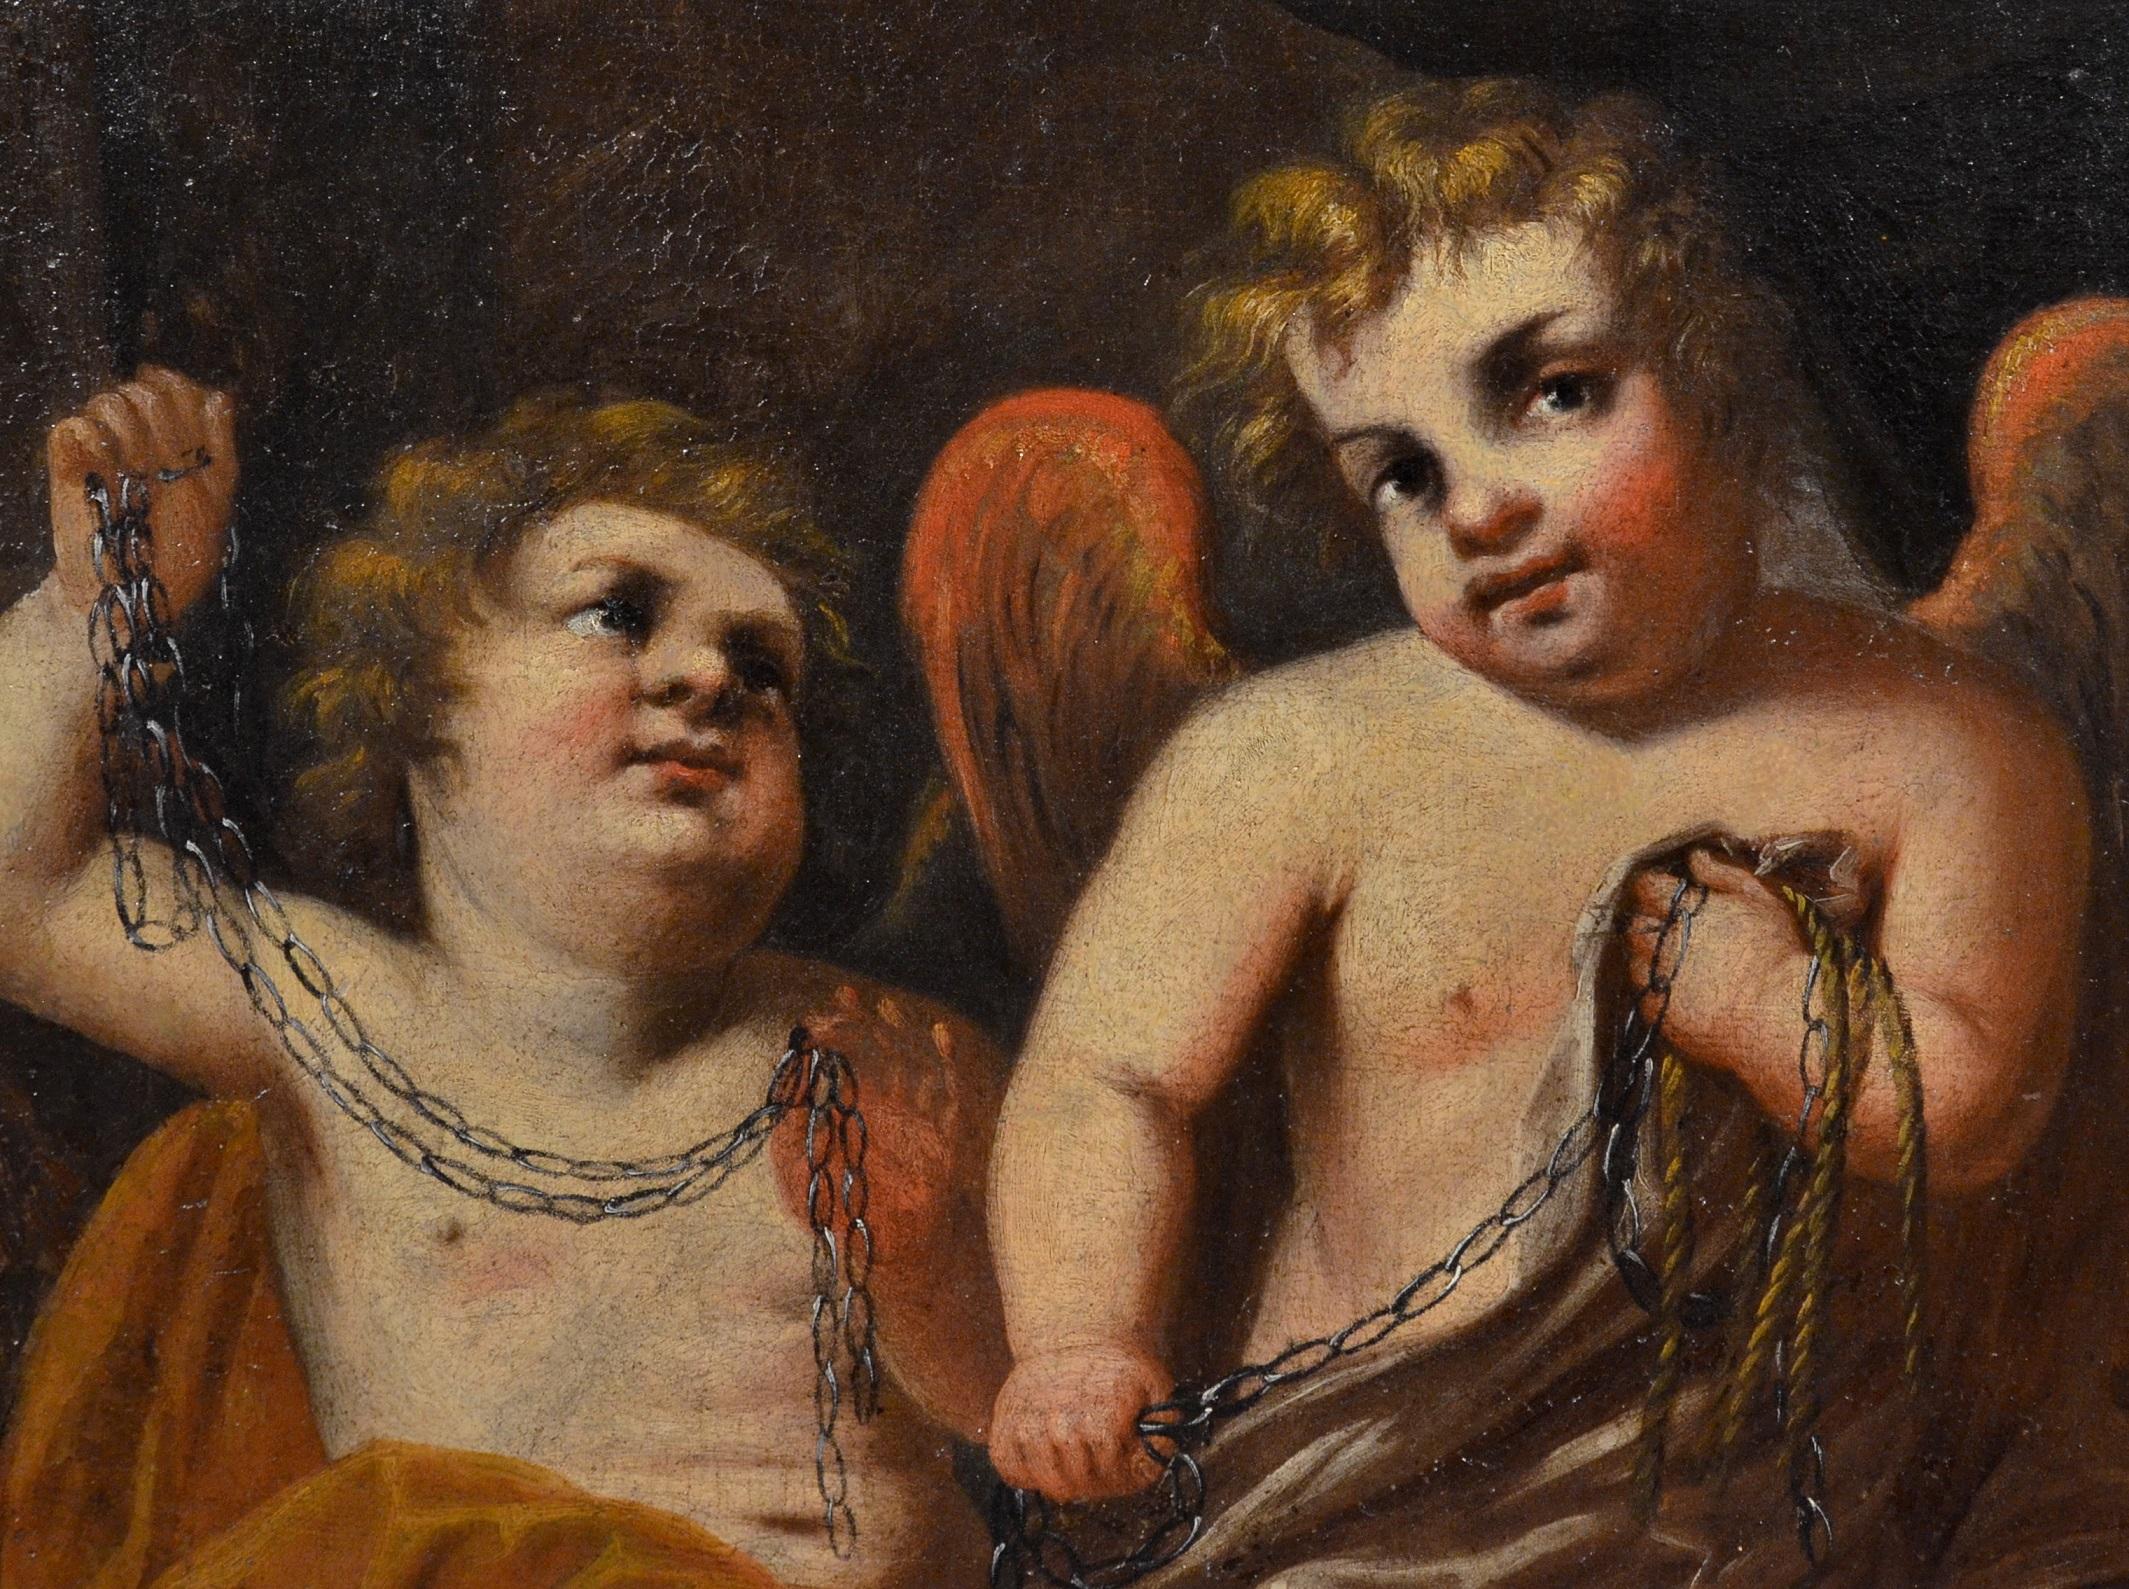 Winged Putti Paint Oil on canvas Baroque 17th Century Mitological Michelangelo  - Old Masters Painting by Giovanni Battista Merano (Genoa 1632 - Plaisance 1698)